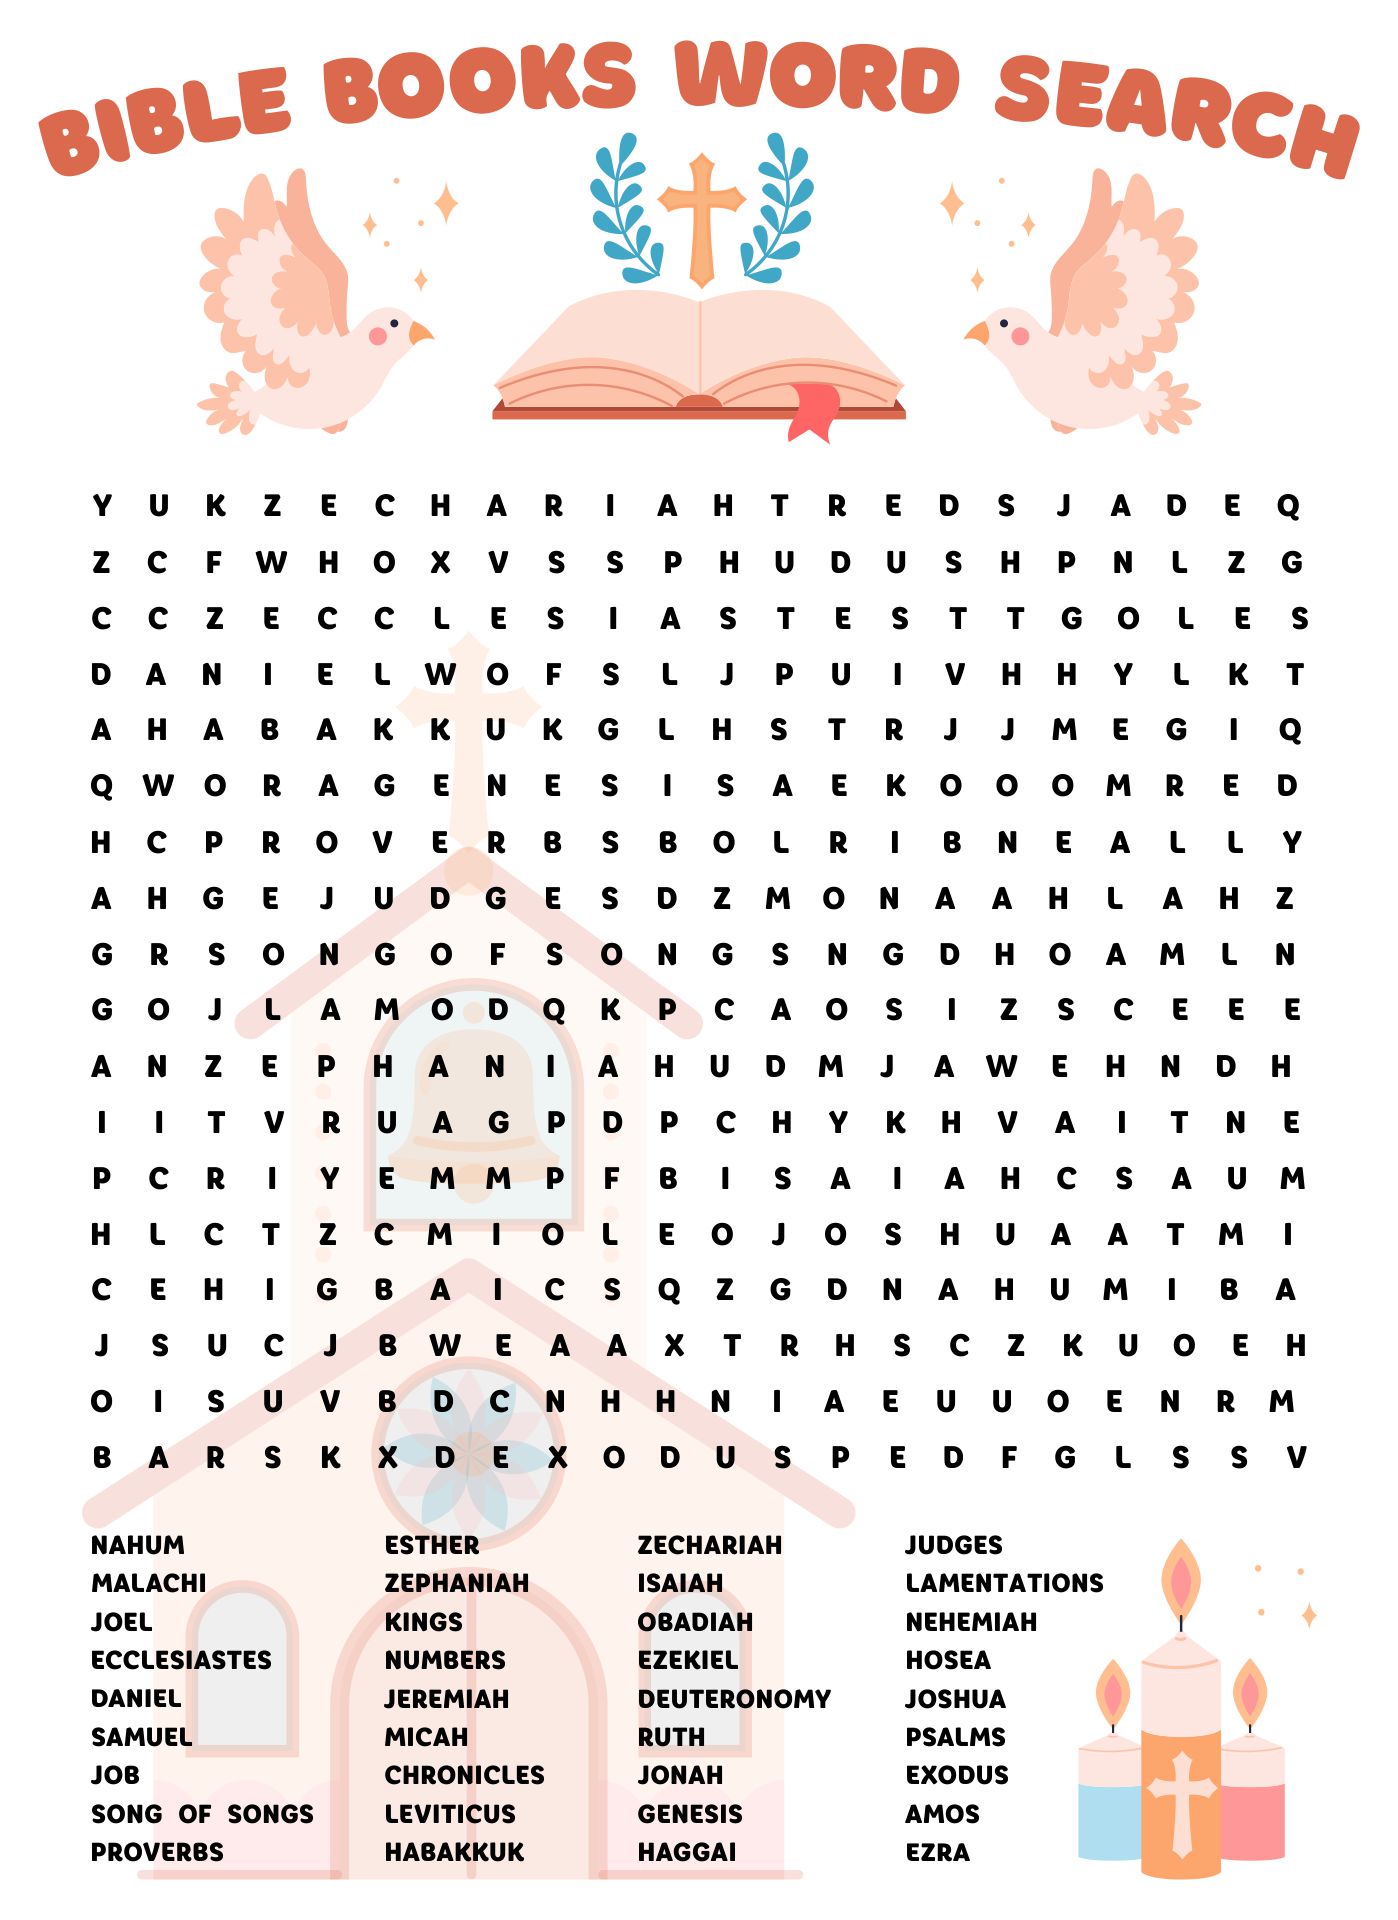 5-best-images-of-biblical-word-search-printable-free-bible-word